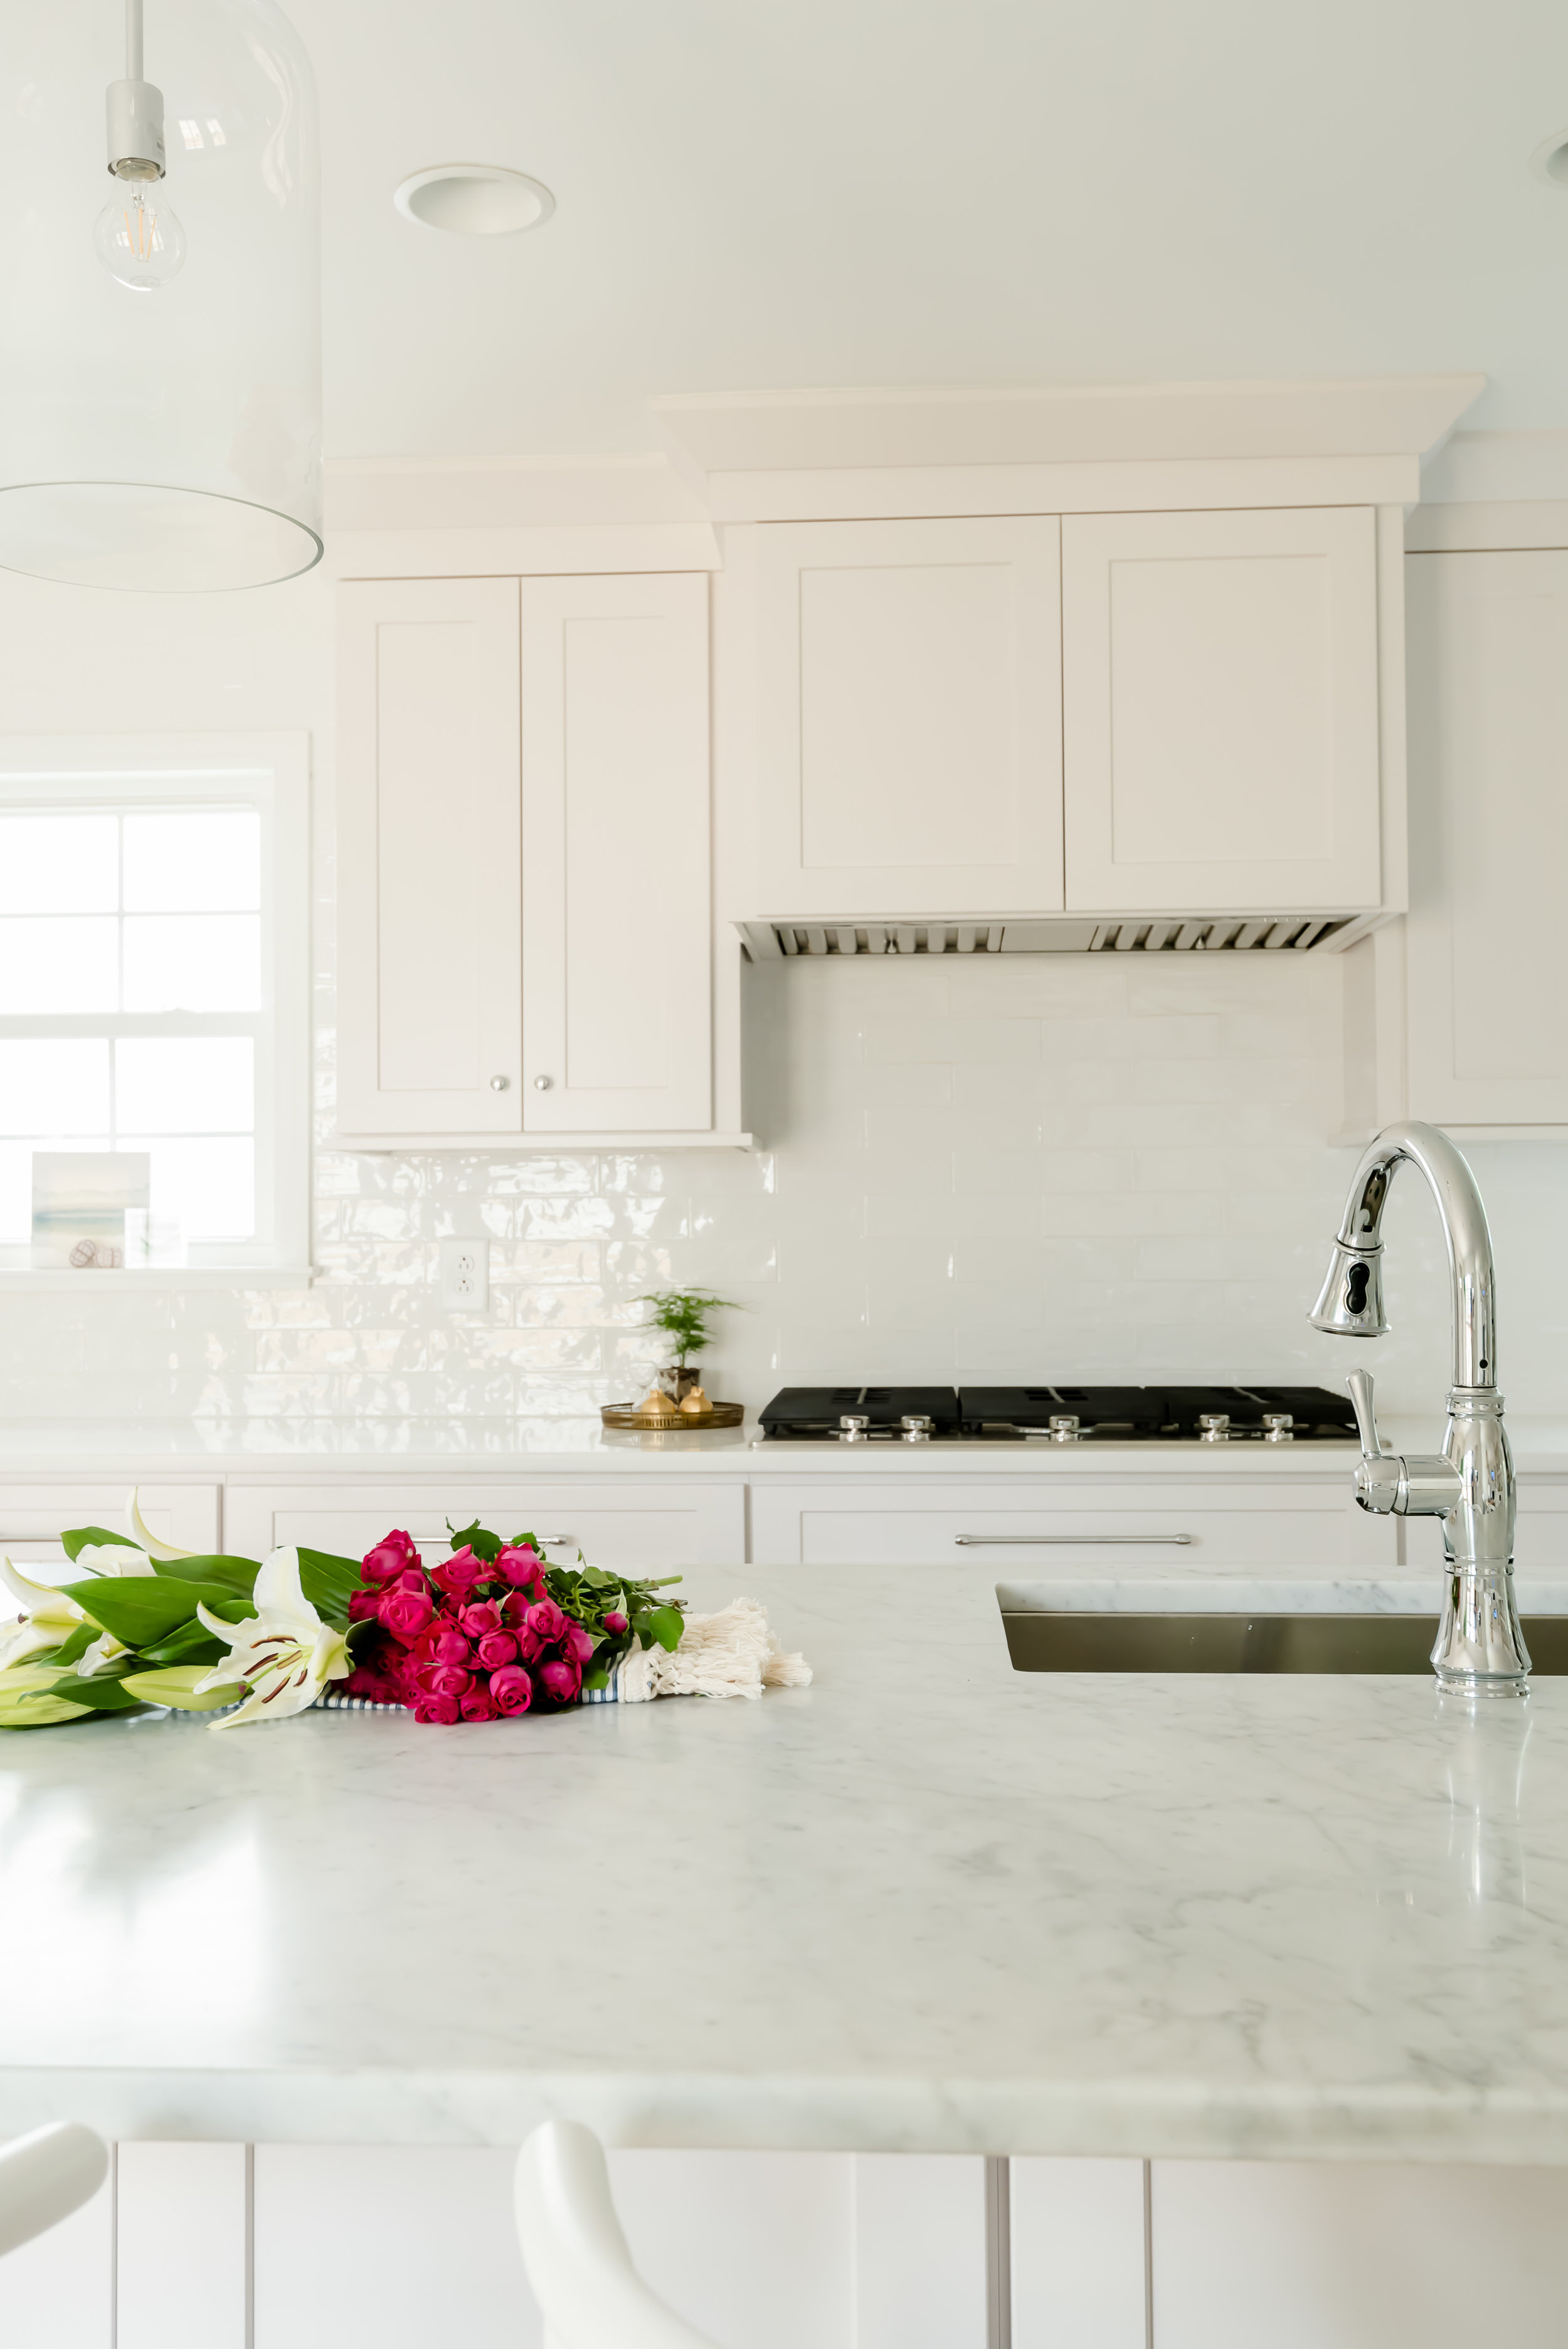  carrara marble was used for the island countertops and we used a quartz (caesarstone in blizzard) for the rest of the countertops. 